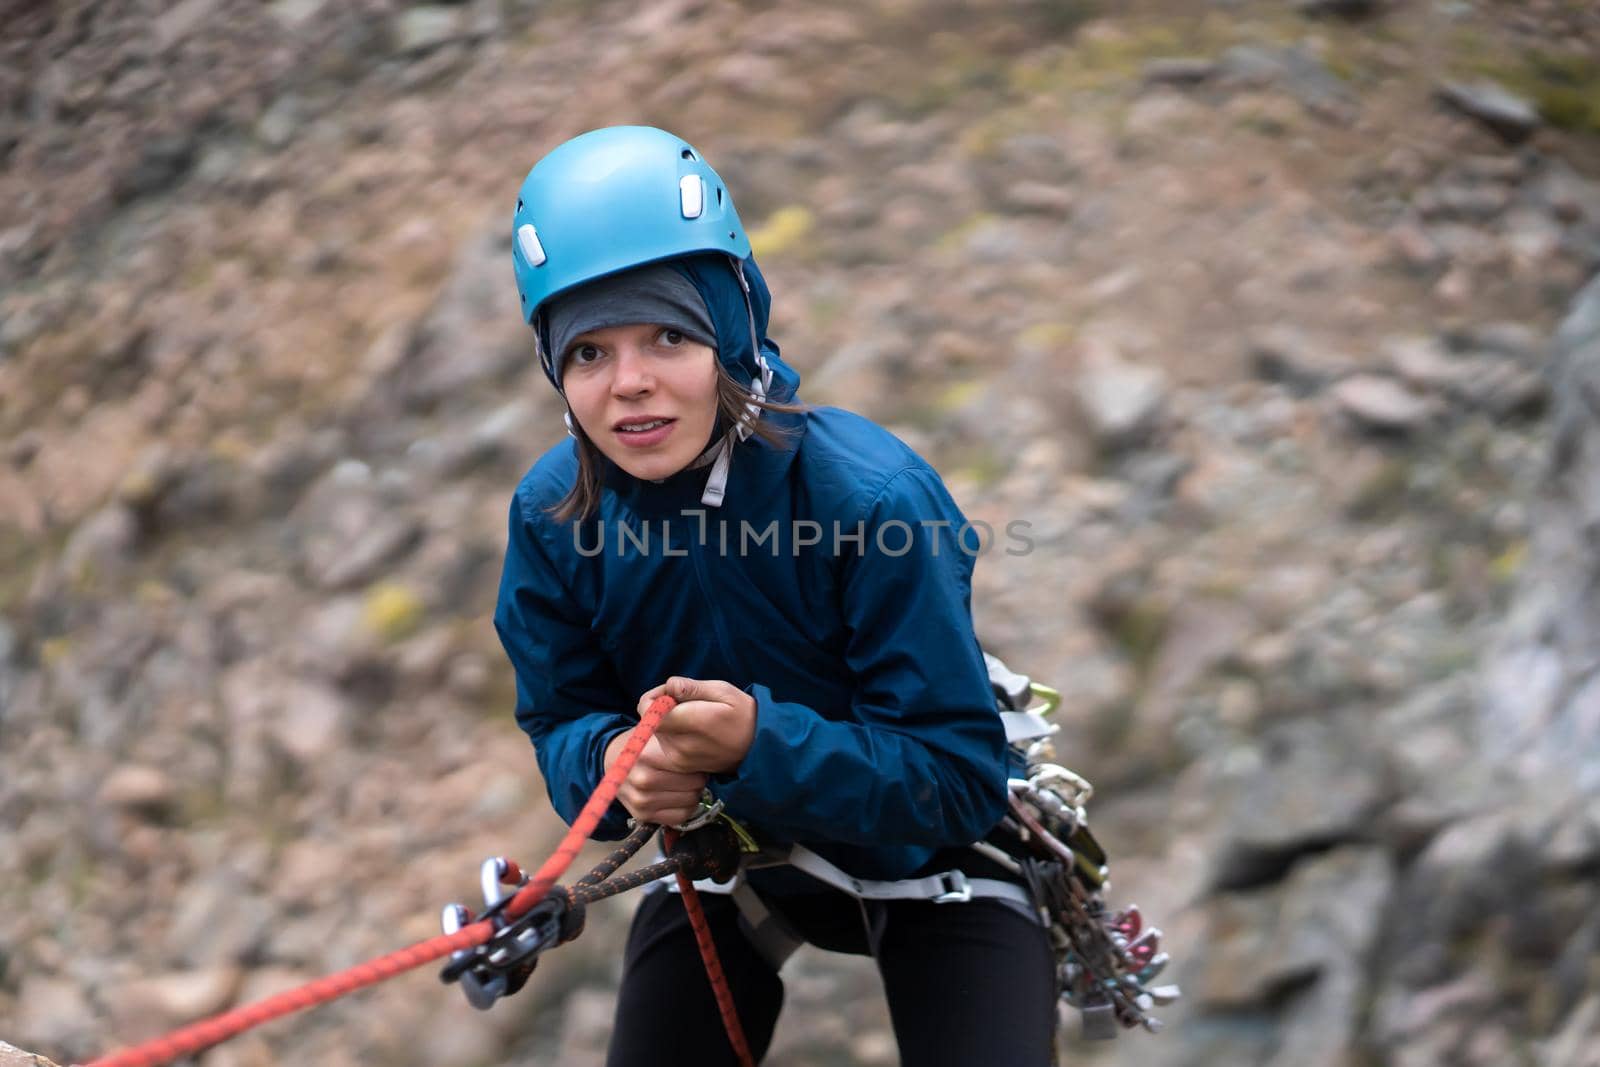 Traveler with mountaineering equipment and a helmet descends from the top of the mountain on a rope, view from above. Young cute girl with funny expression is engaged in climbing.